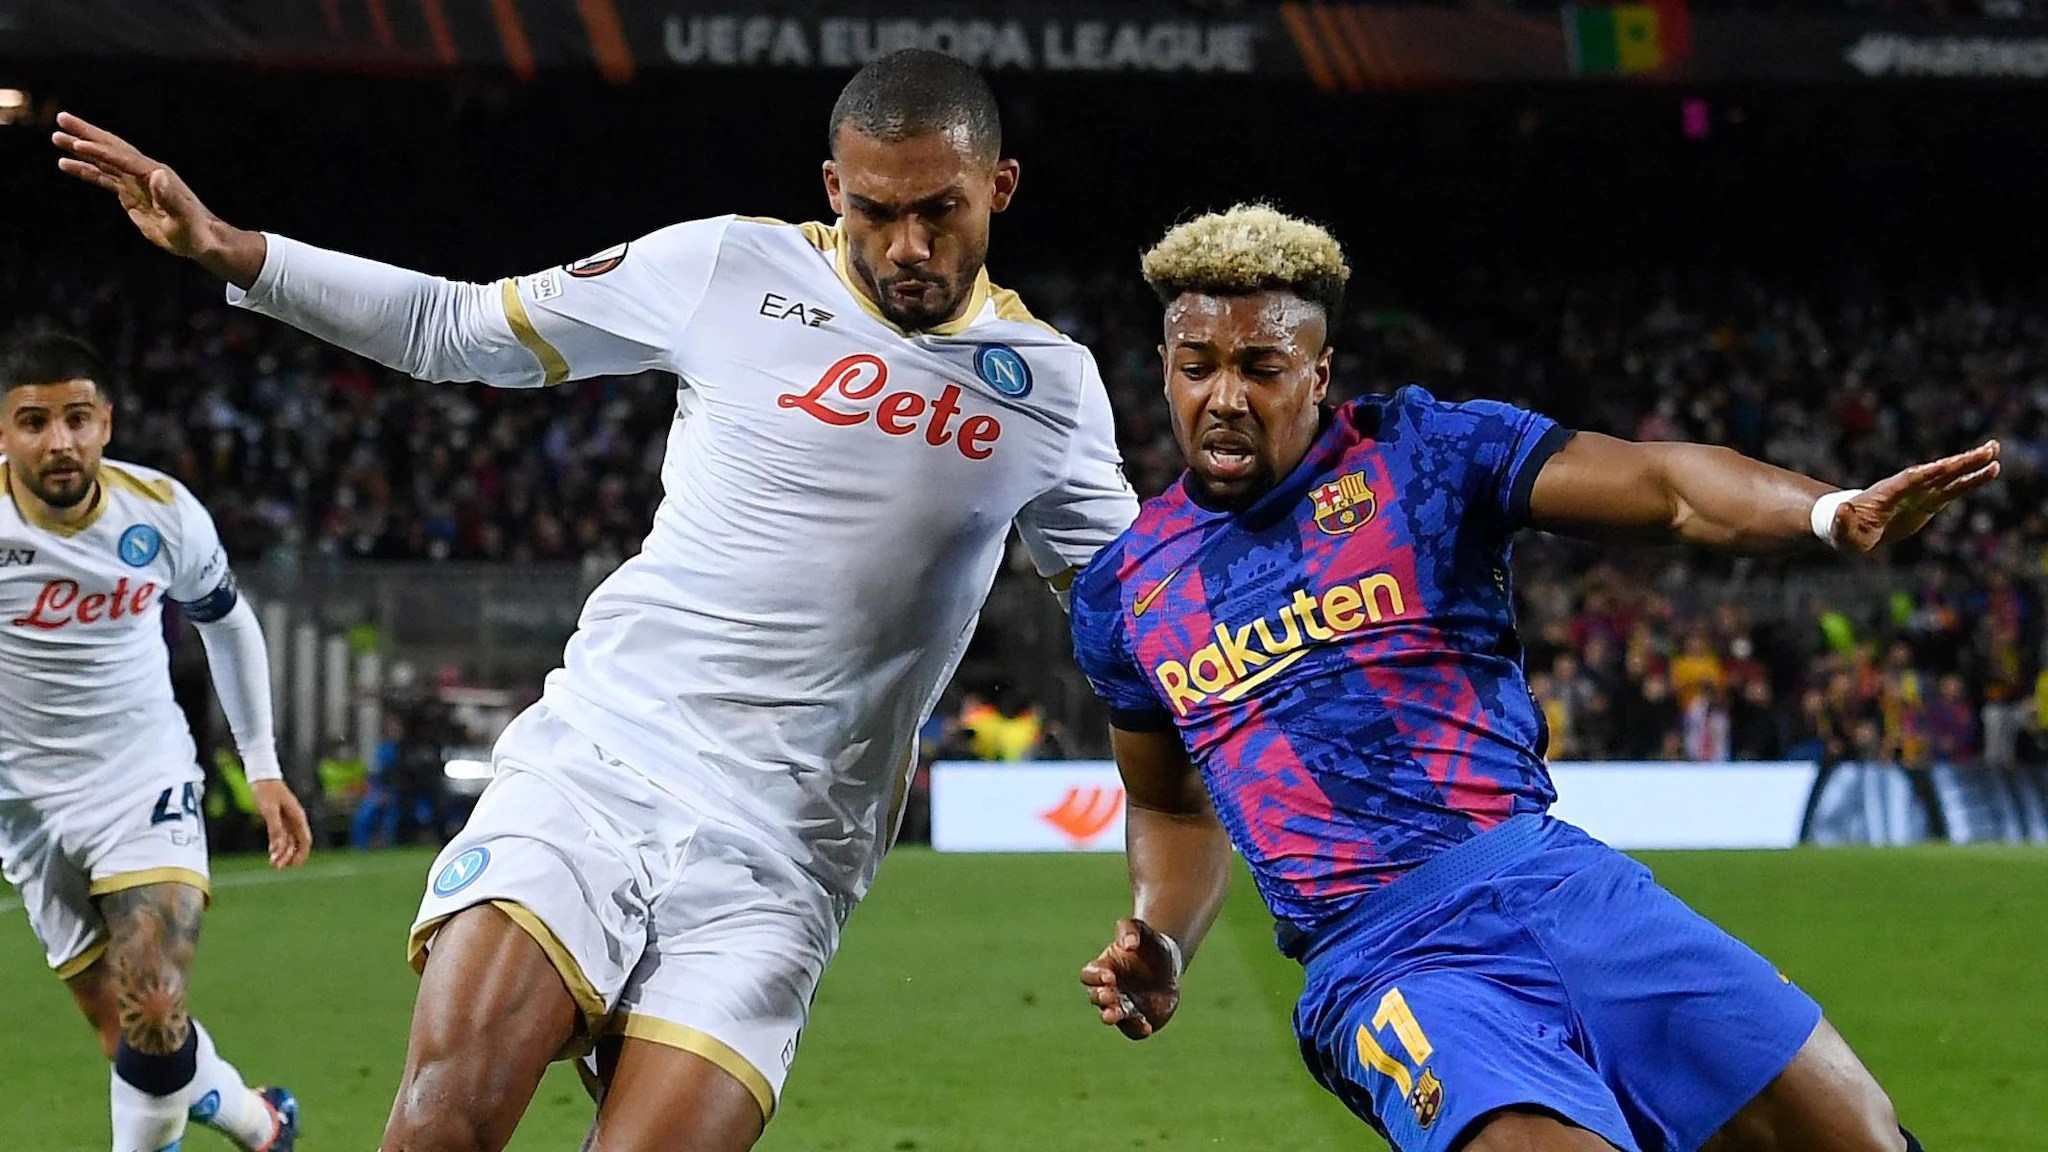 Napoli vs Barcelona Live: When and where to watch UEFA Europa League match, NAP vs BAR 2nd Leg live streaming? Get Live Telecast details